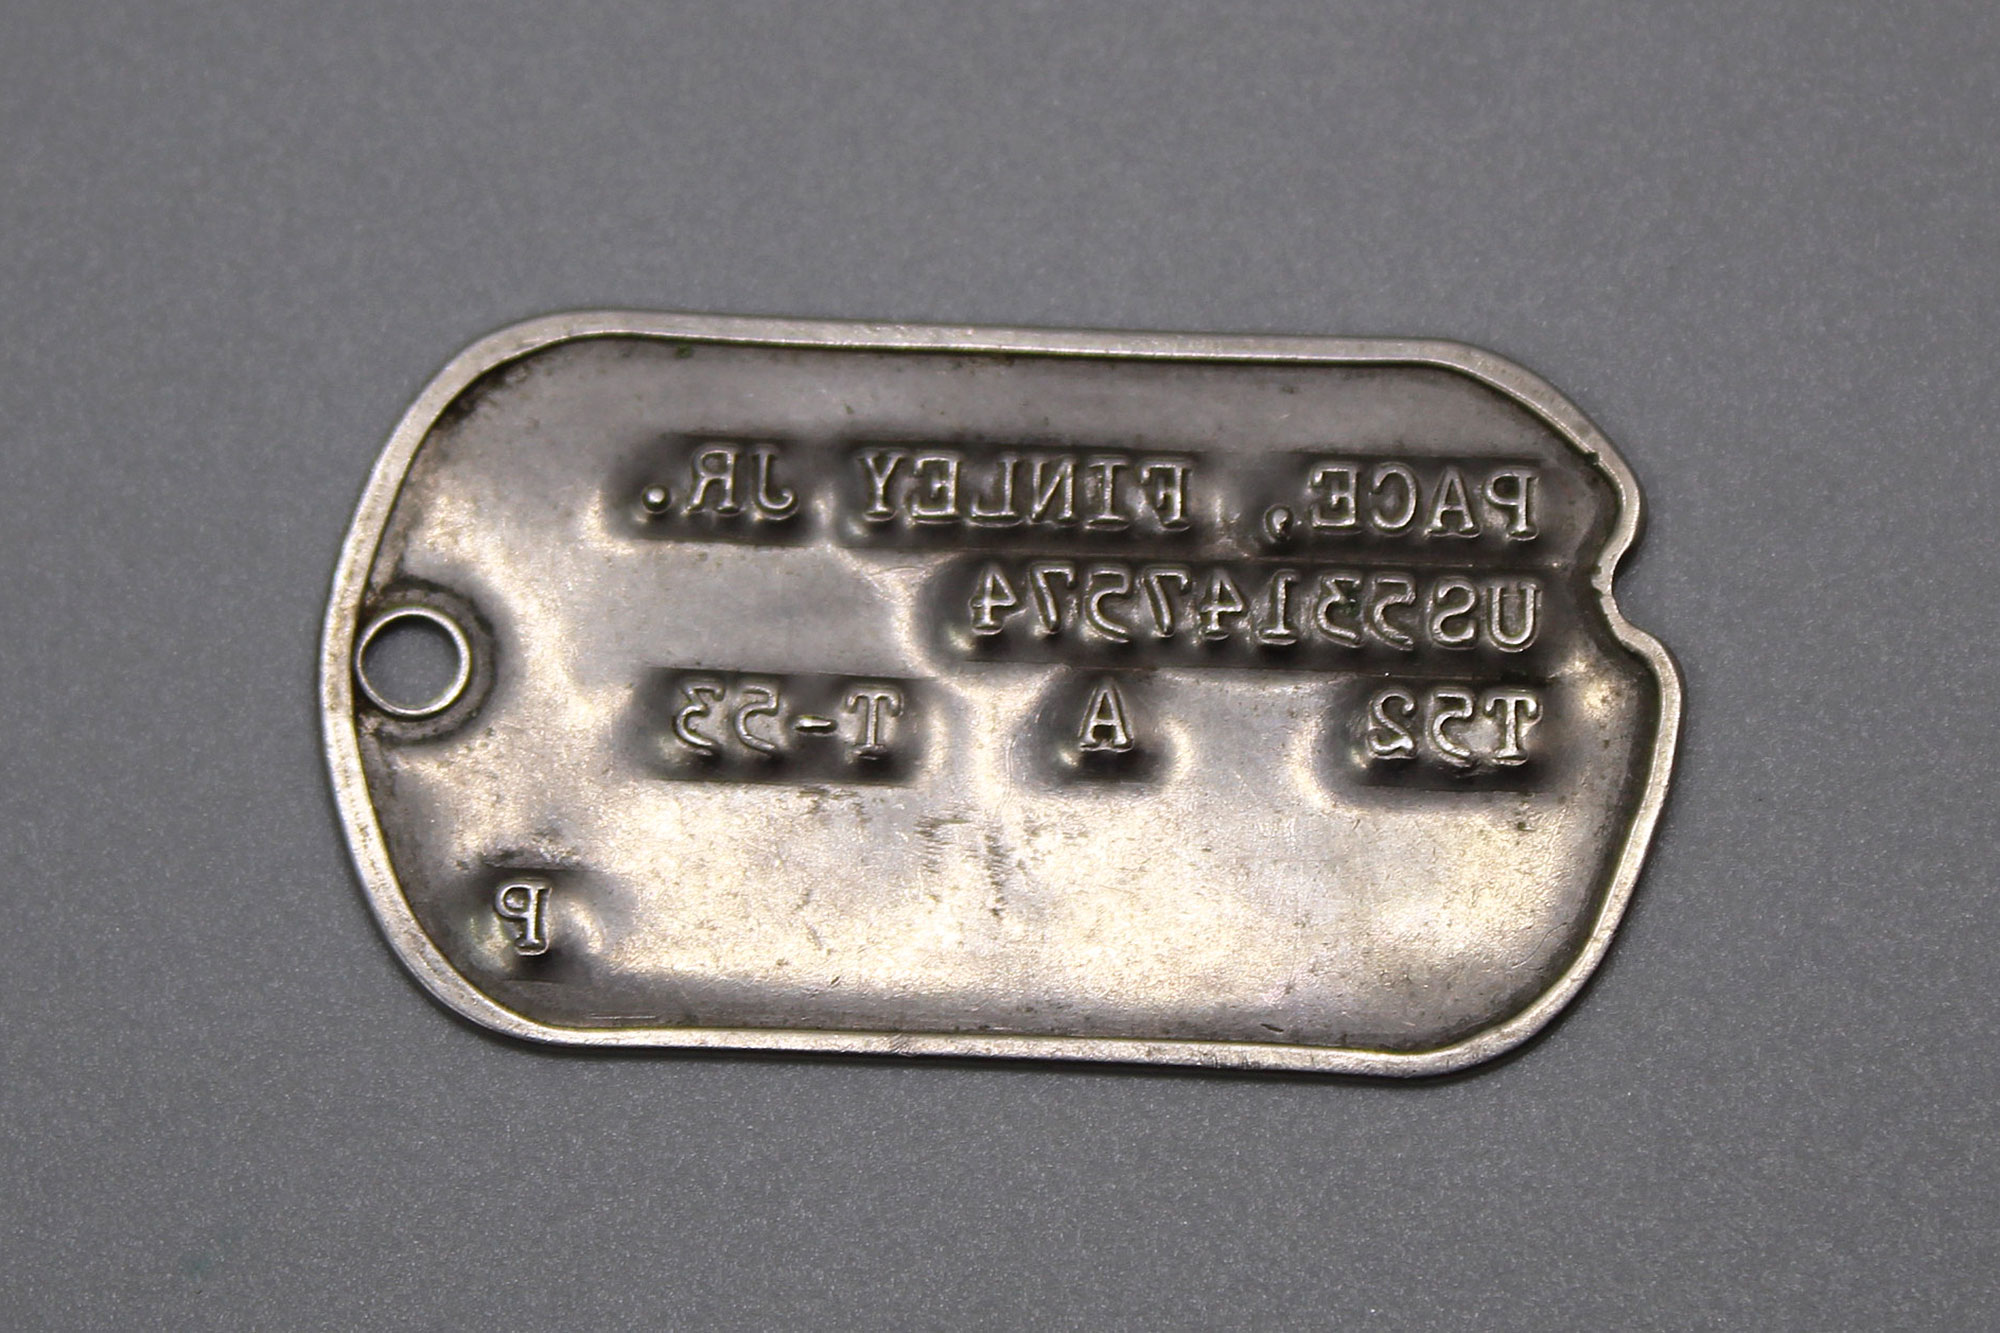 WW II 3rd type Dog Tags - Type III Notched Dogtags